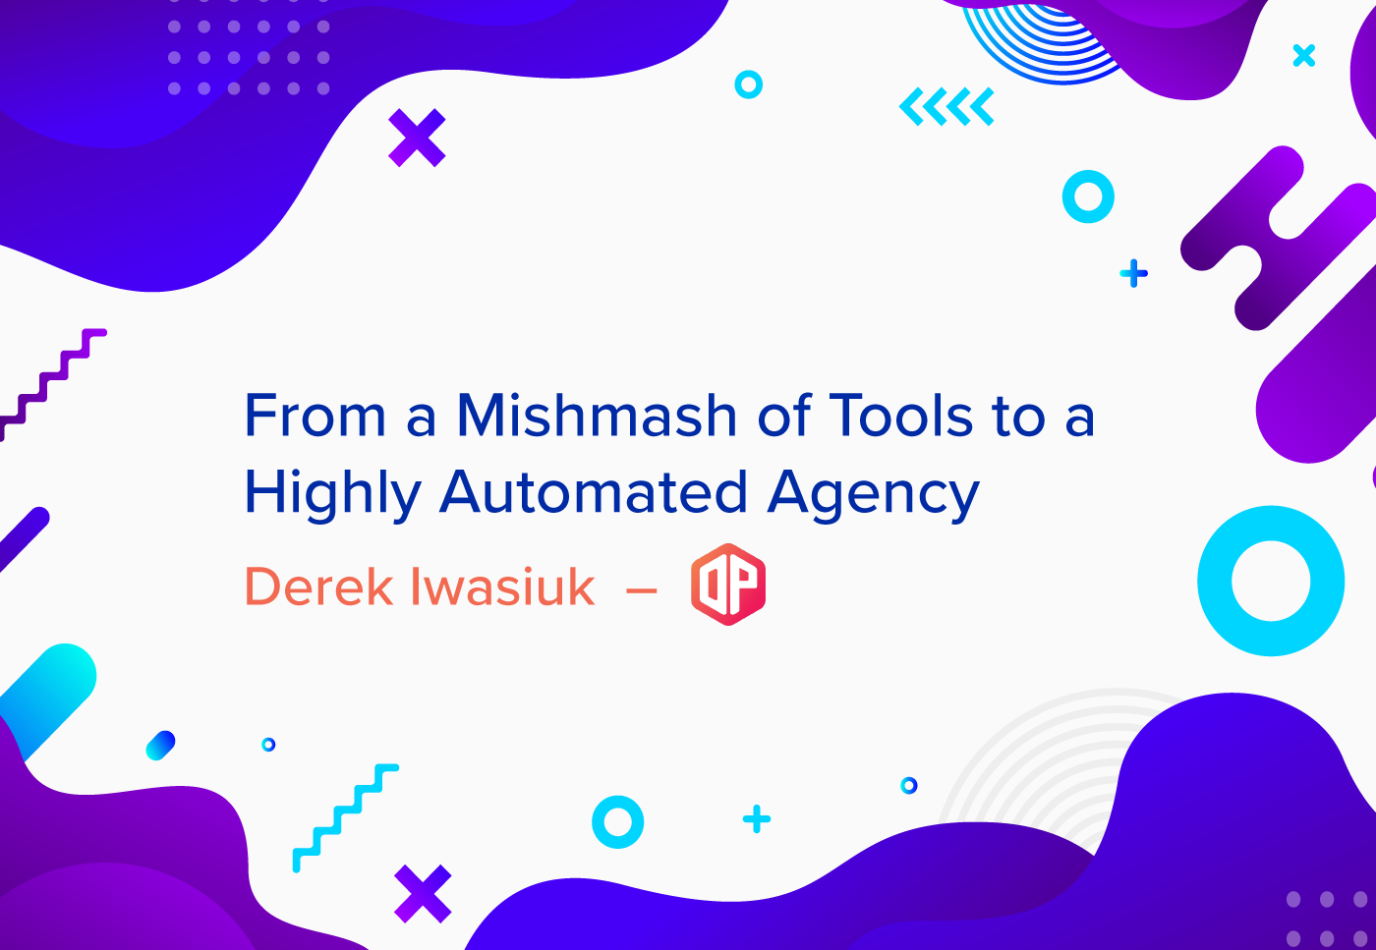 Digitalpush From a Mishmash of Tools to a Highly Automated Agency